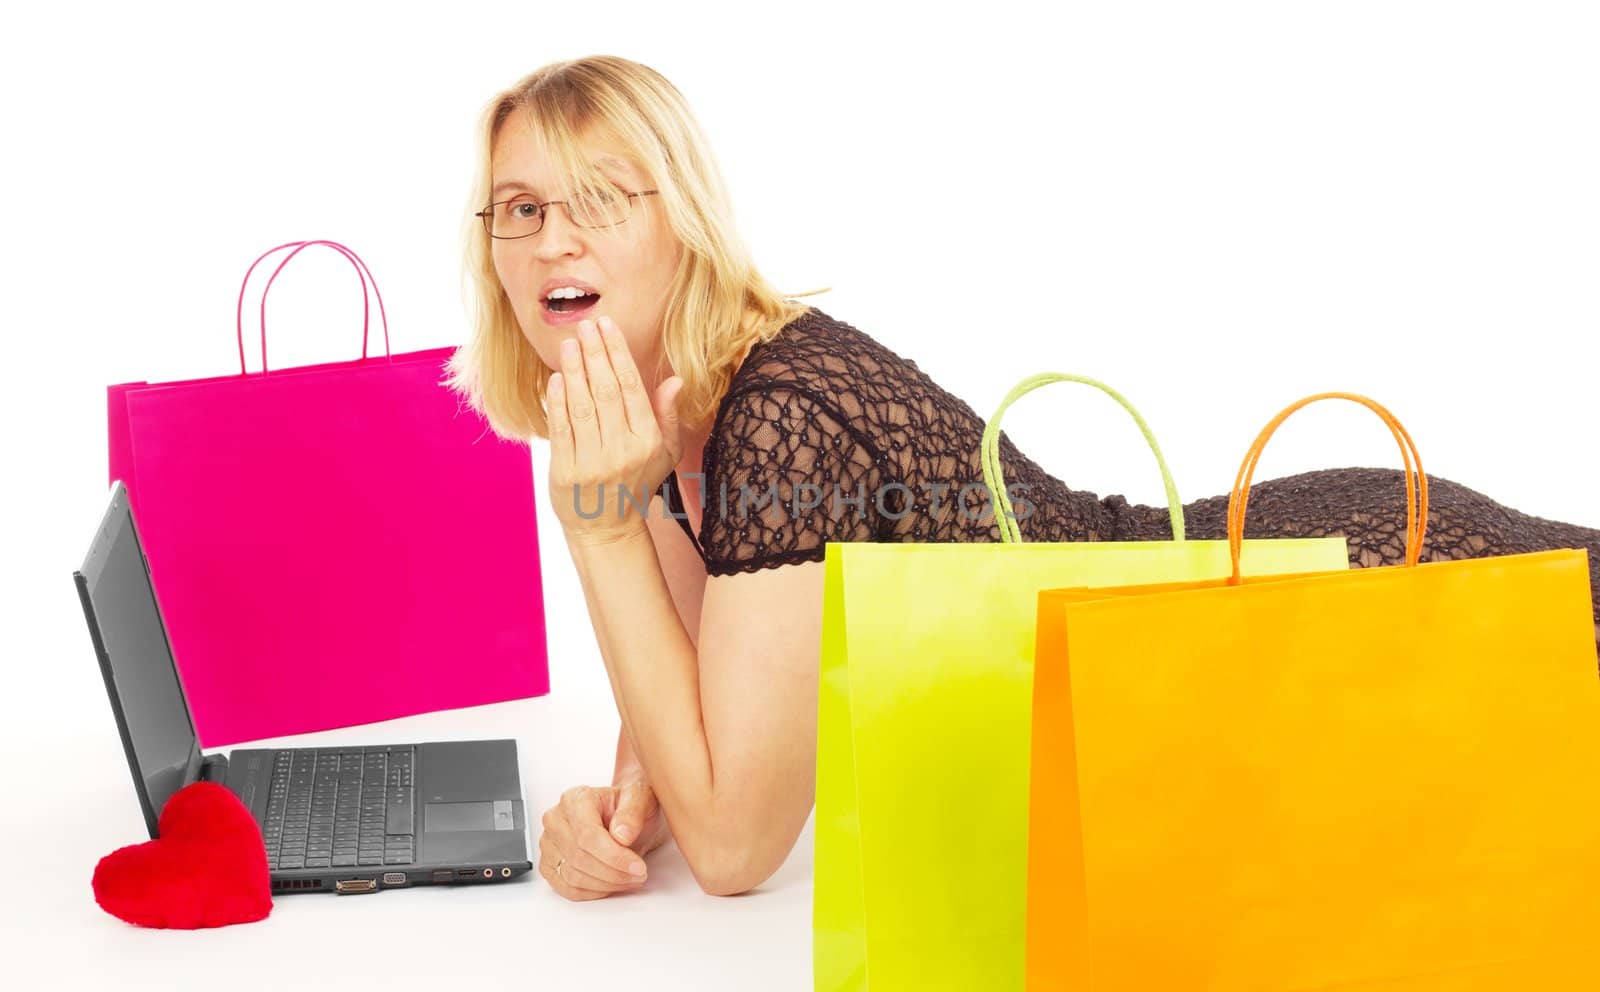 Attractive woman shopping over the internet